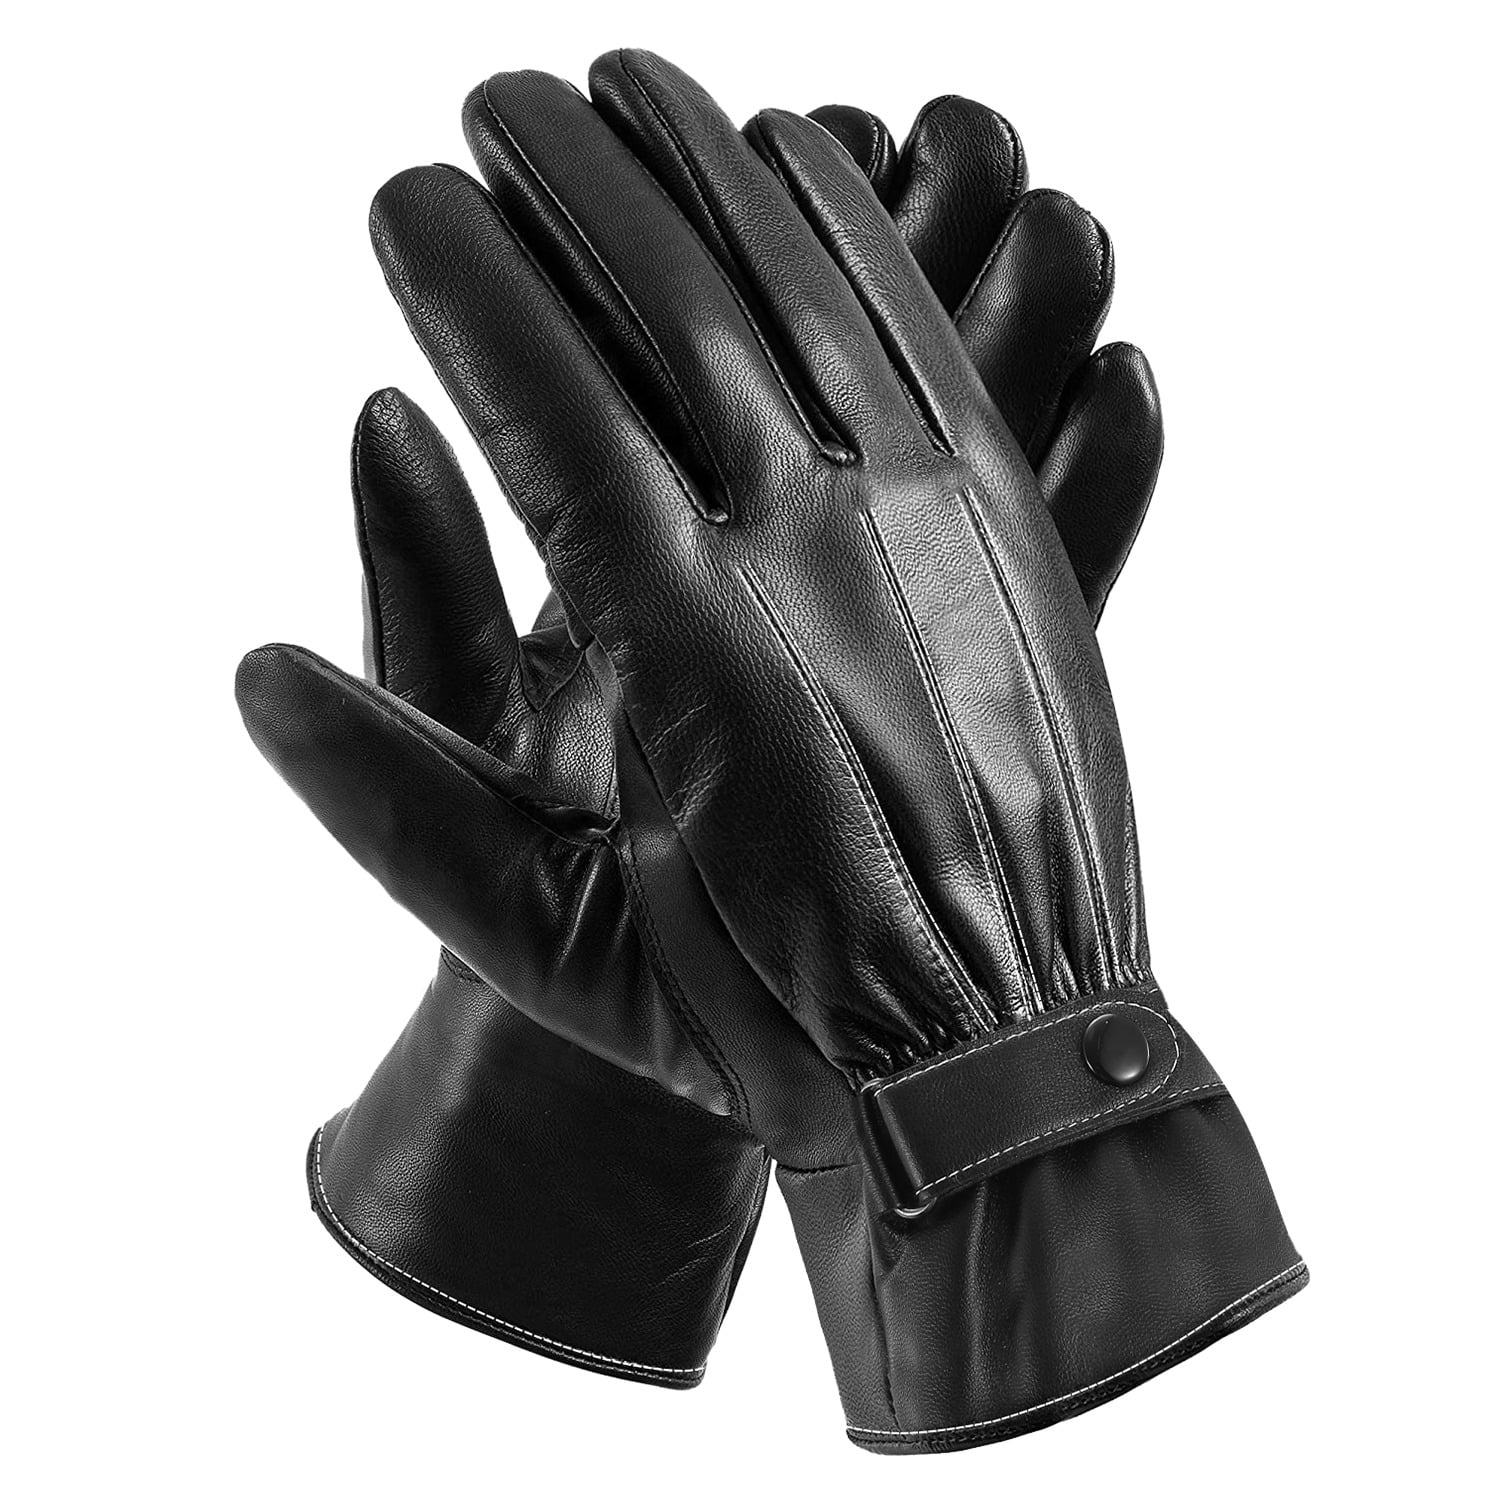 ACOGO Warm Winter Gloves Durable Leather Work Gloves for Men Classic Thin  Driving Touch Screen Motorcycle Full Fingers at  Men's Clothing store